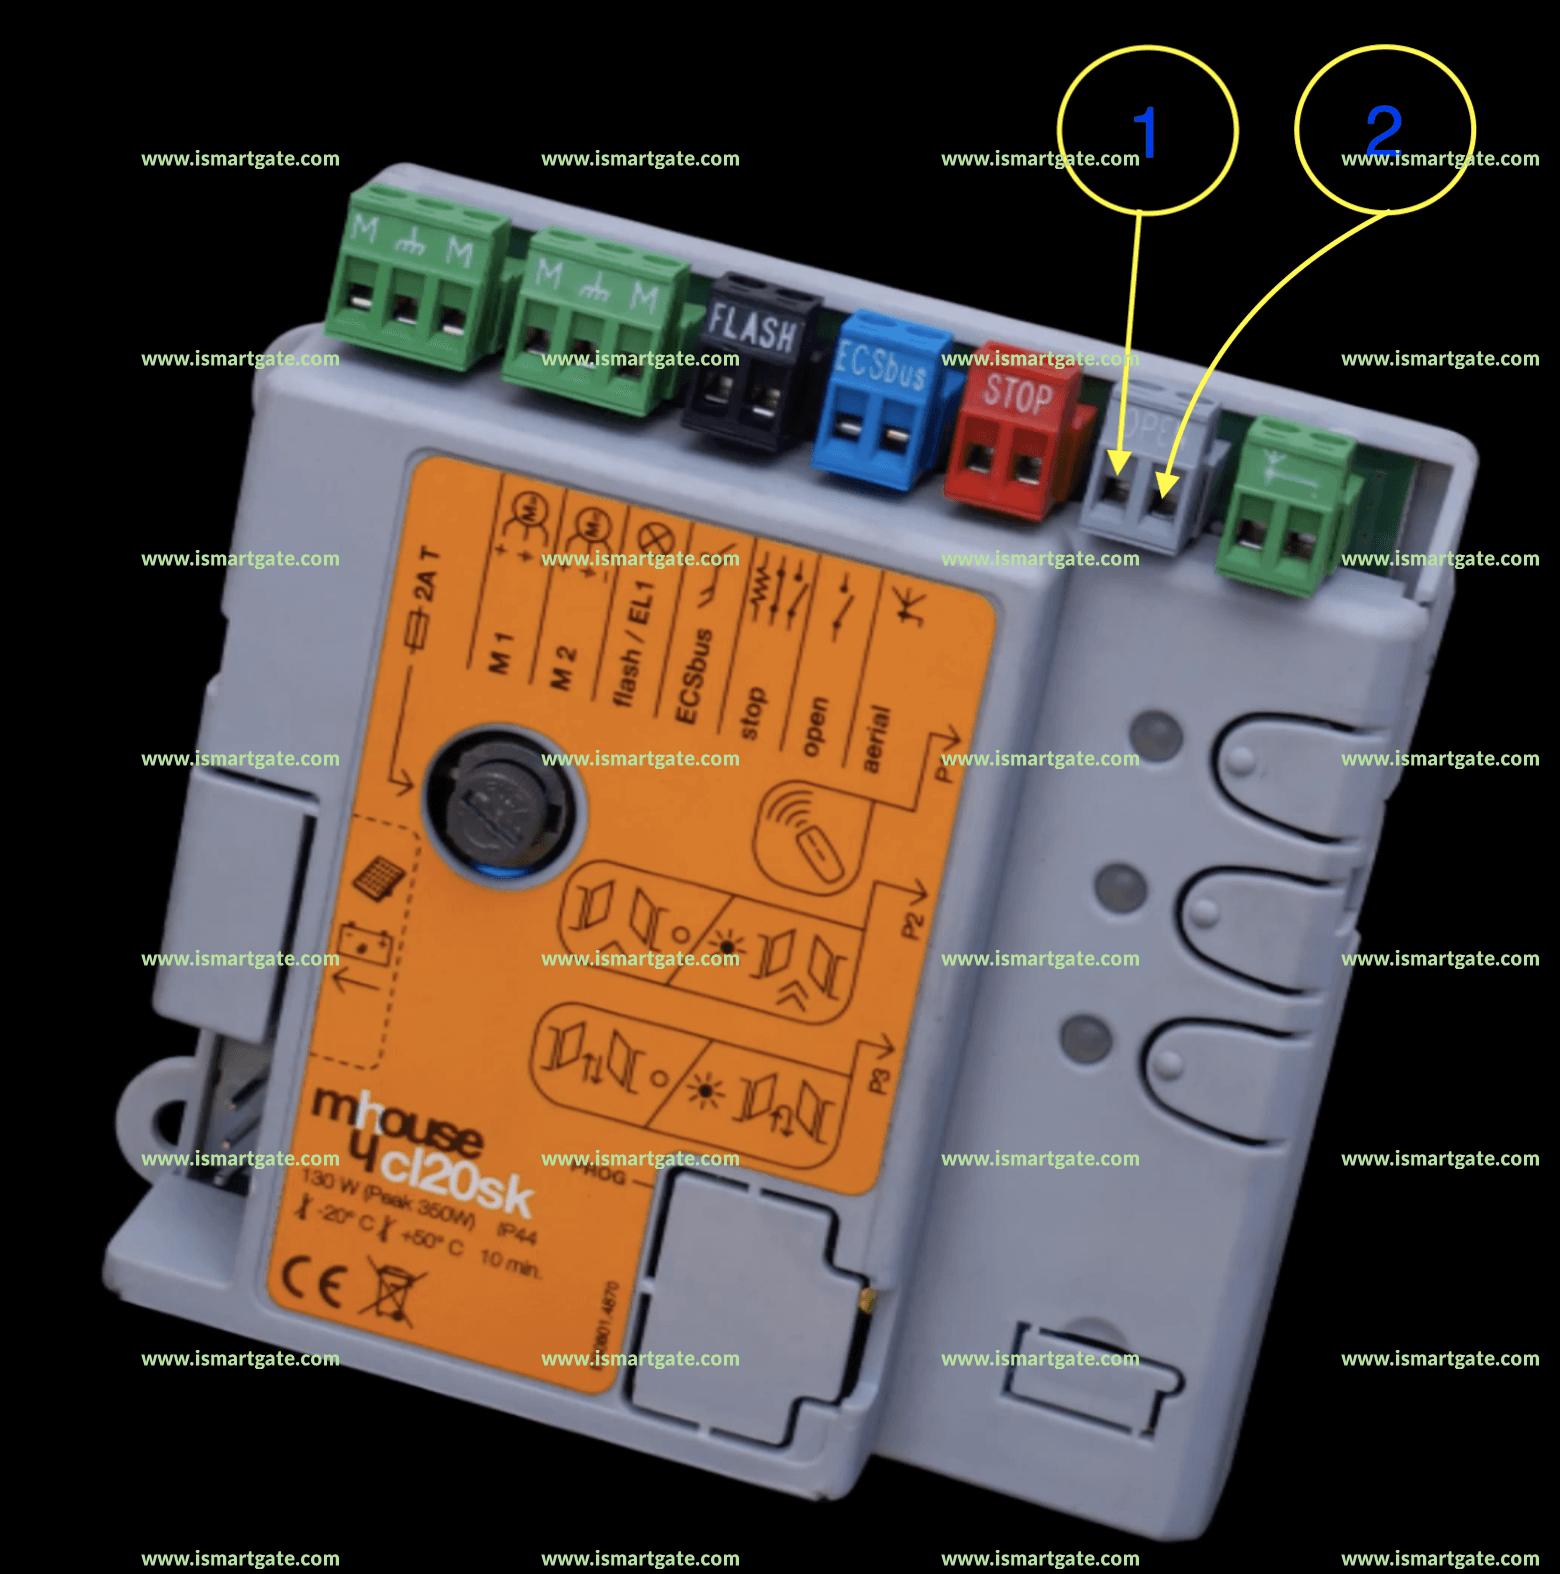 Wiring diagram for Mhouse cl20sk